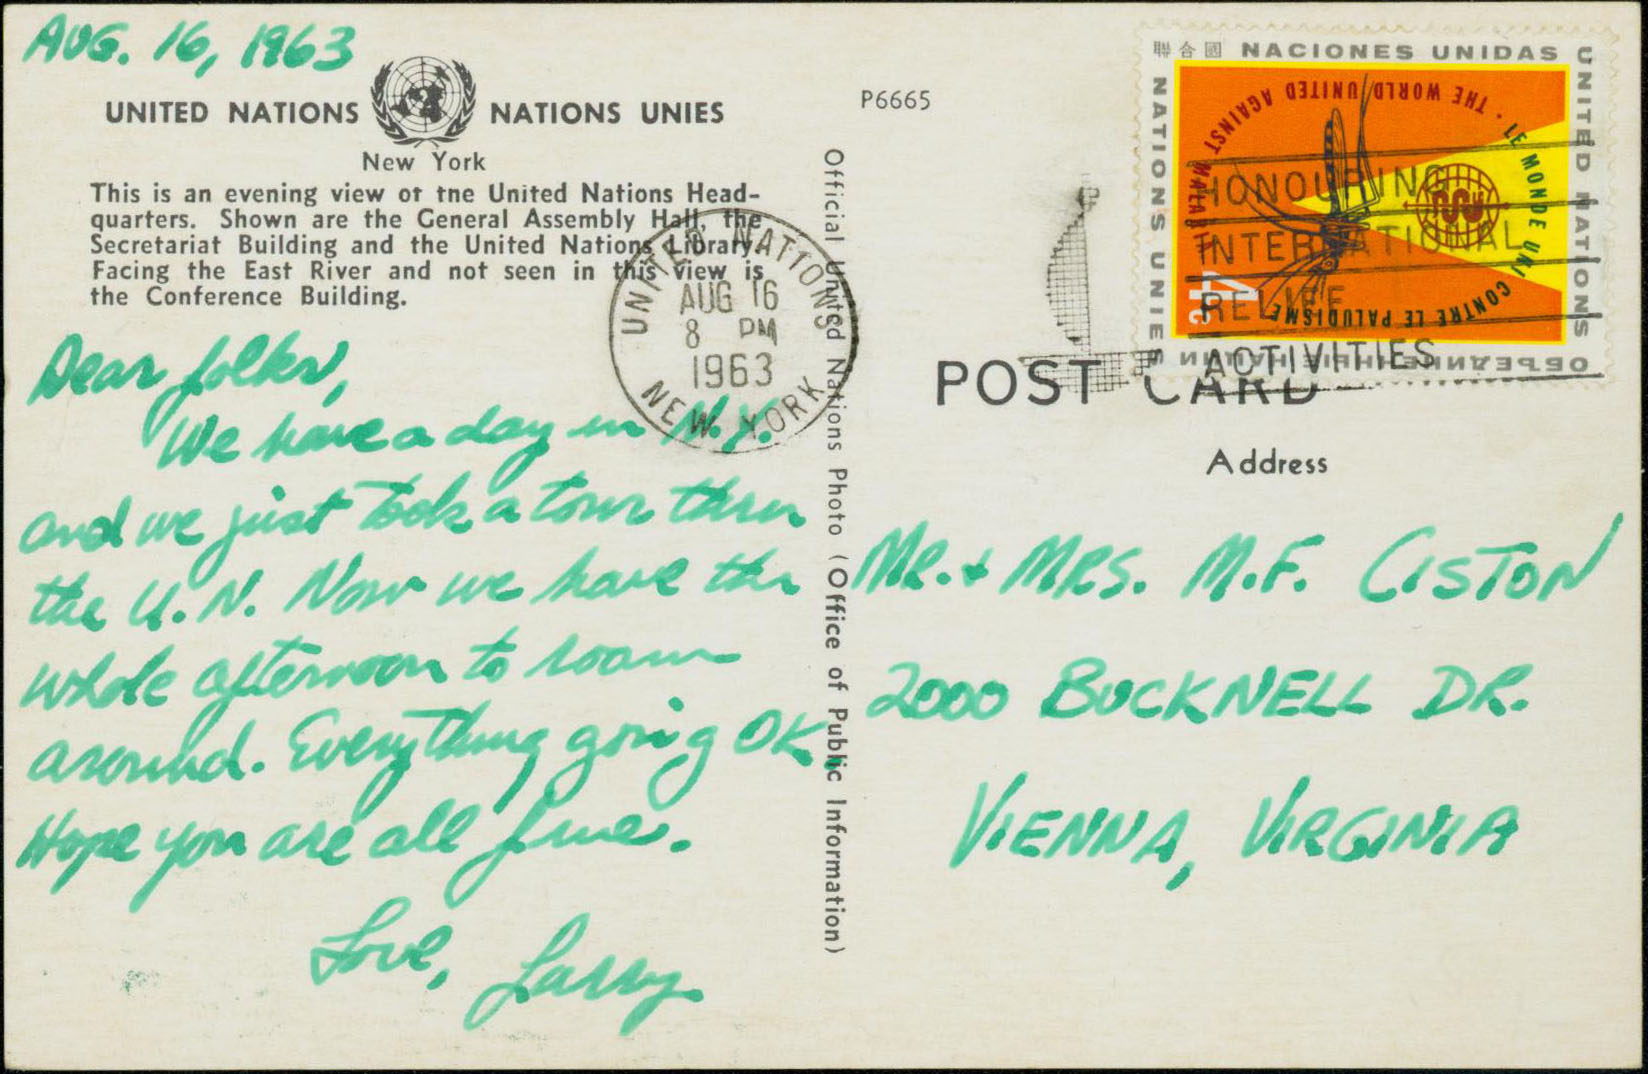 Postcard Rate: January 7th, 1963 until January 6th, 1968